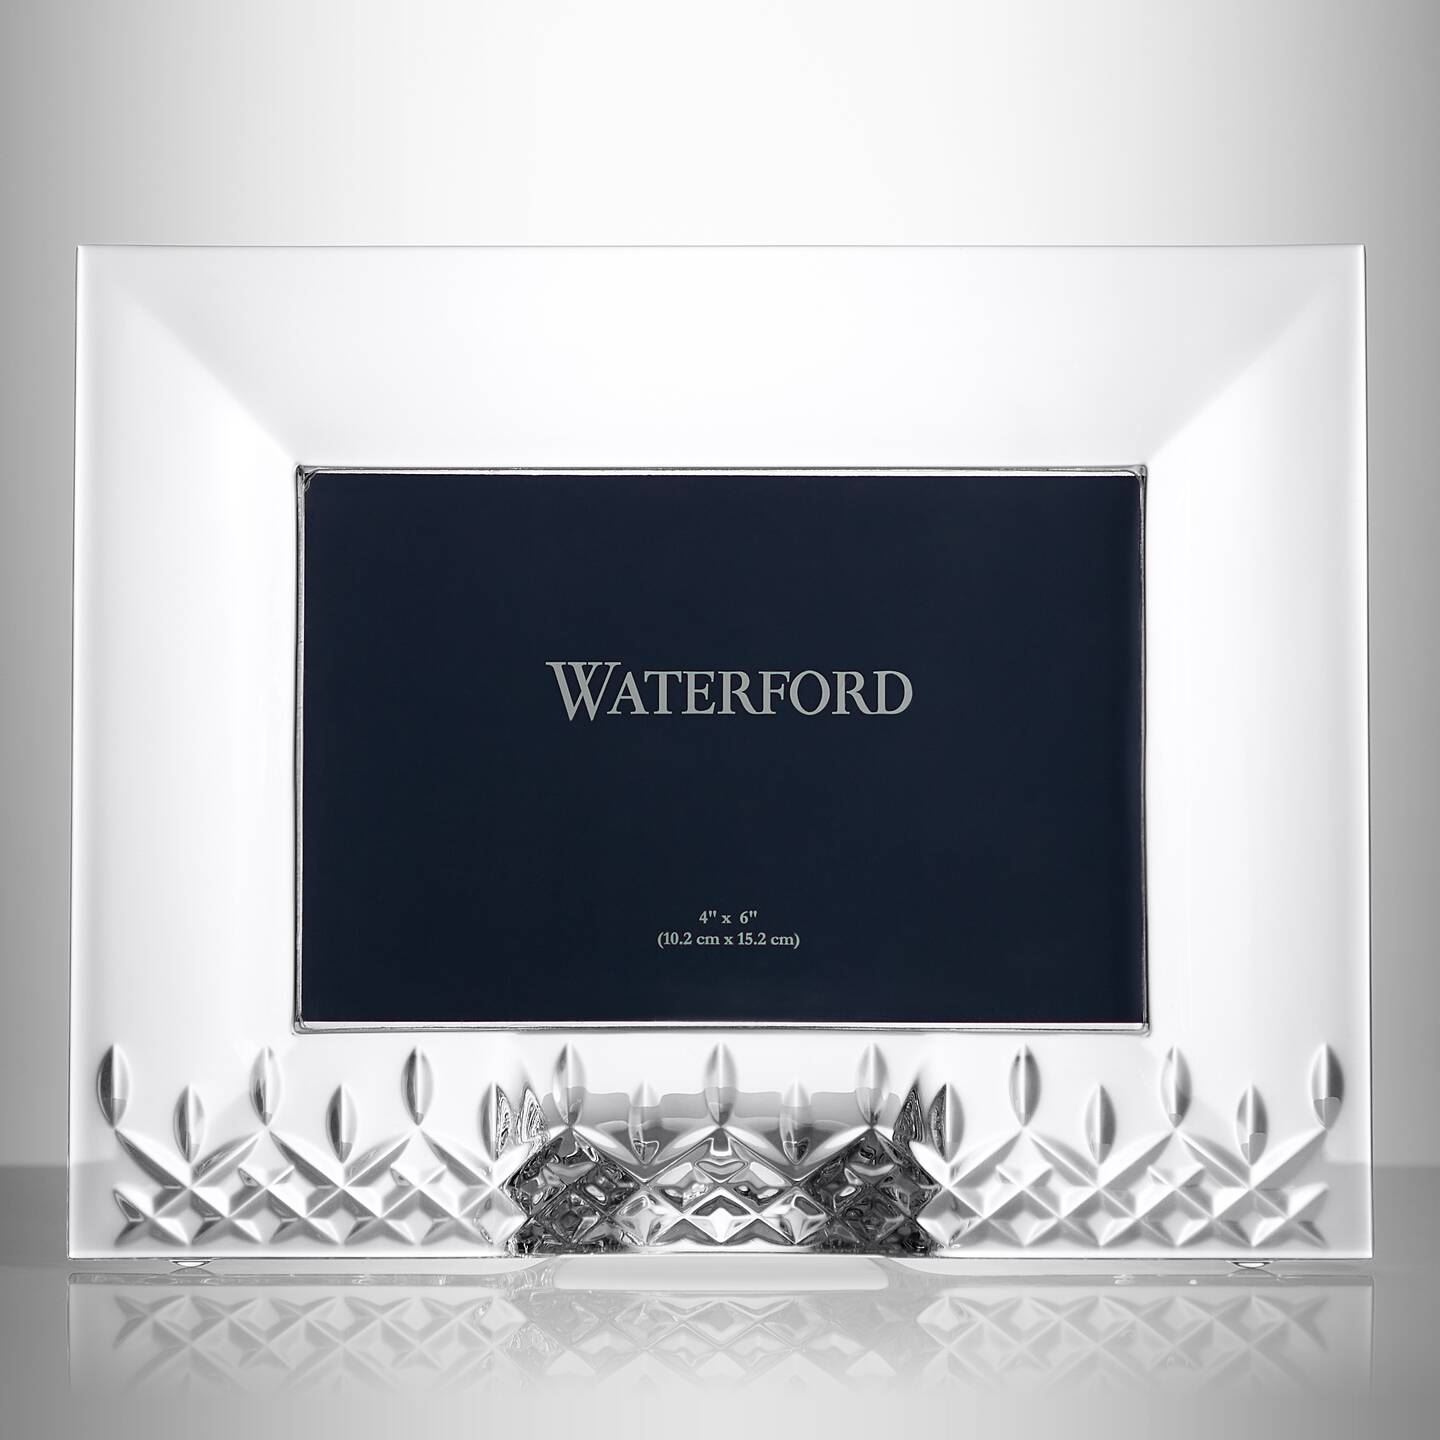 NEW Waterford Crystal LISMORE DOUBLE PHOTO Picture Frame 4 x 6" BOX! 